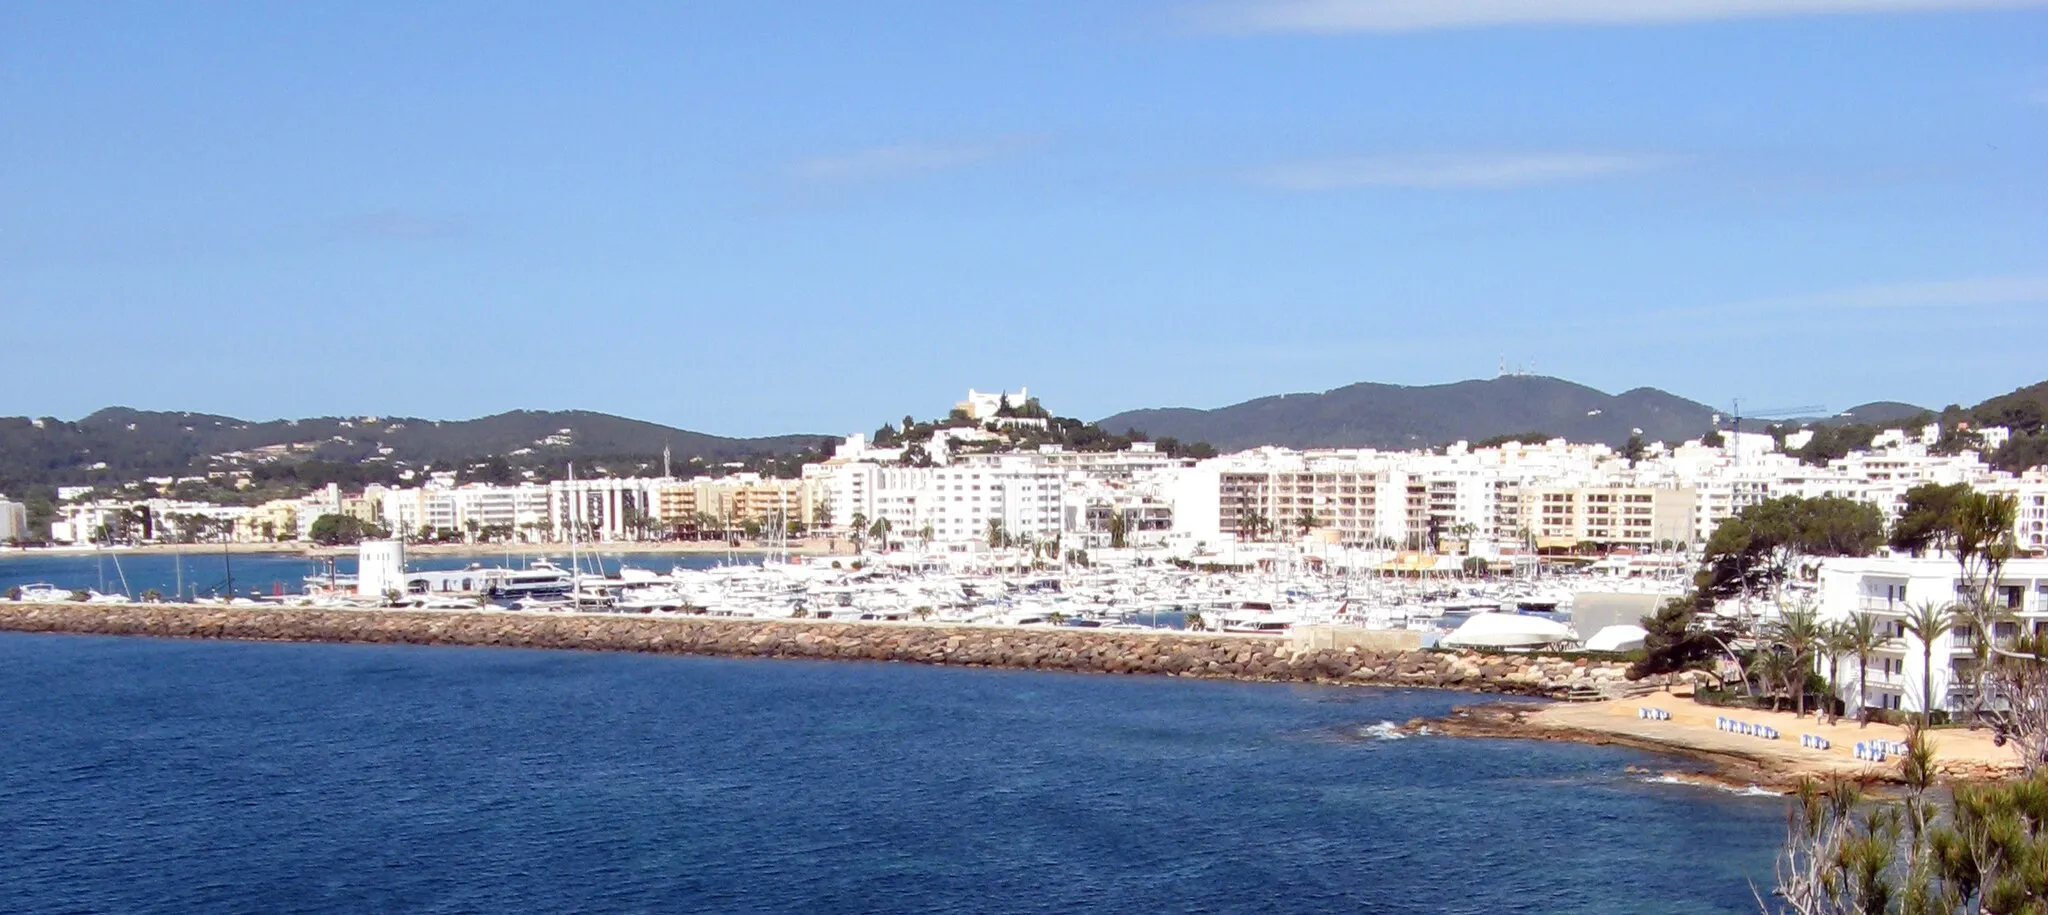 Photo showing: Port and town of Santa Eulària des Riu from the north east